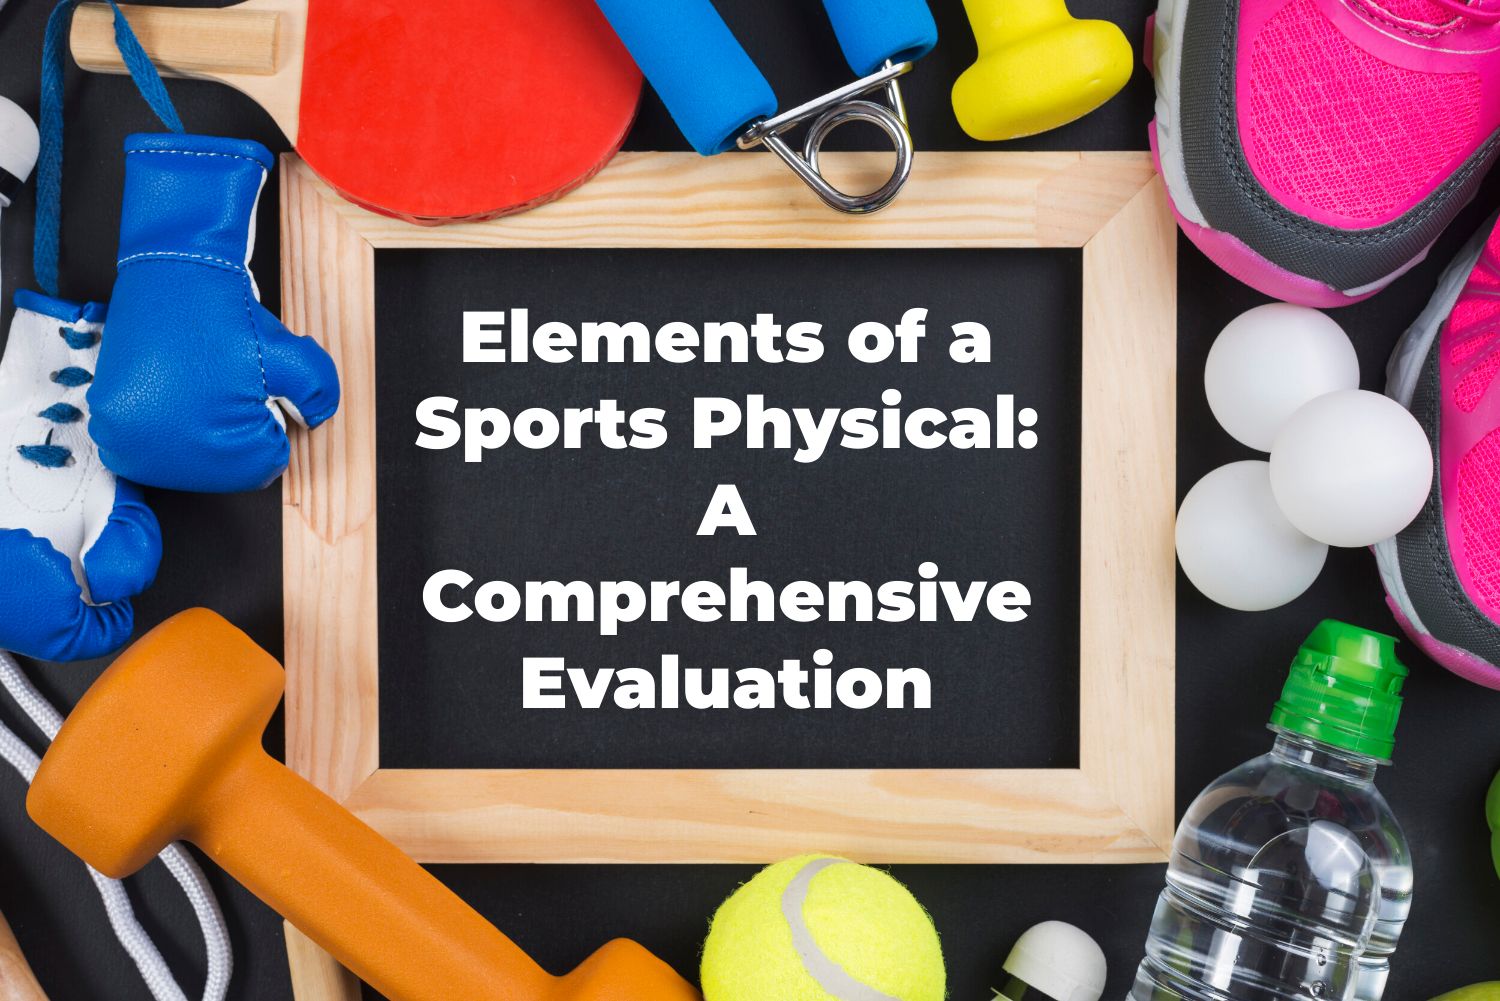 Elements of a Sports Physical